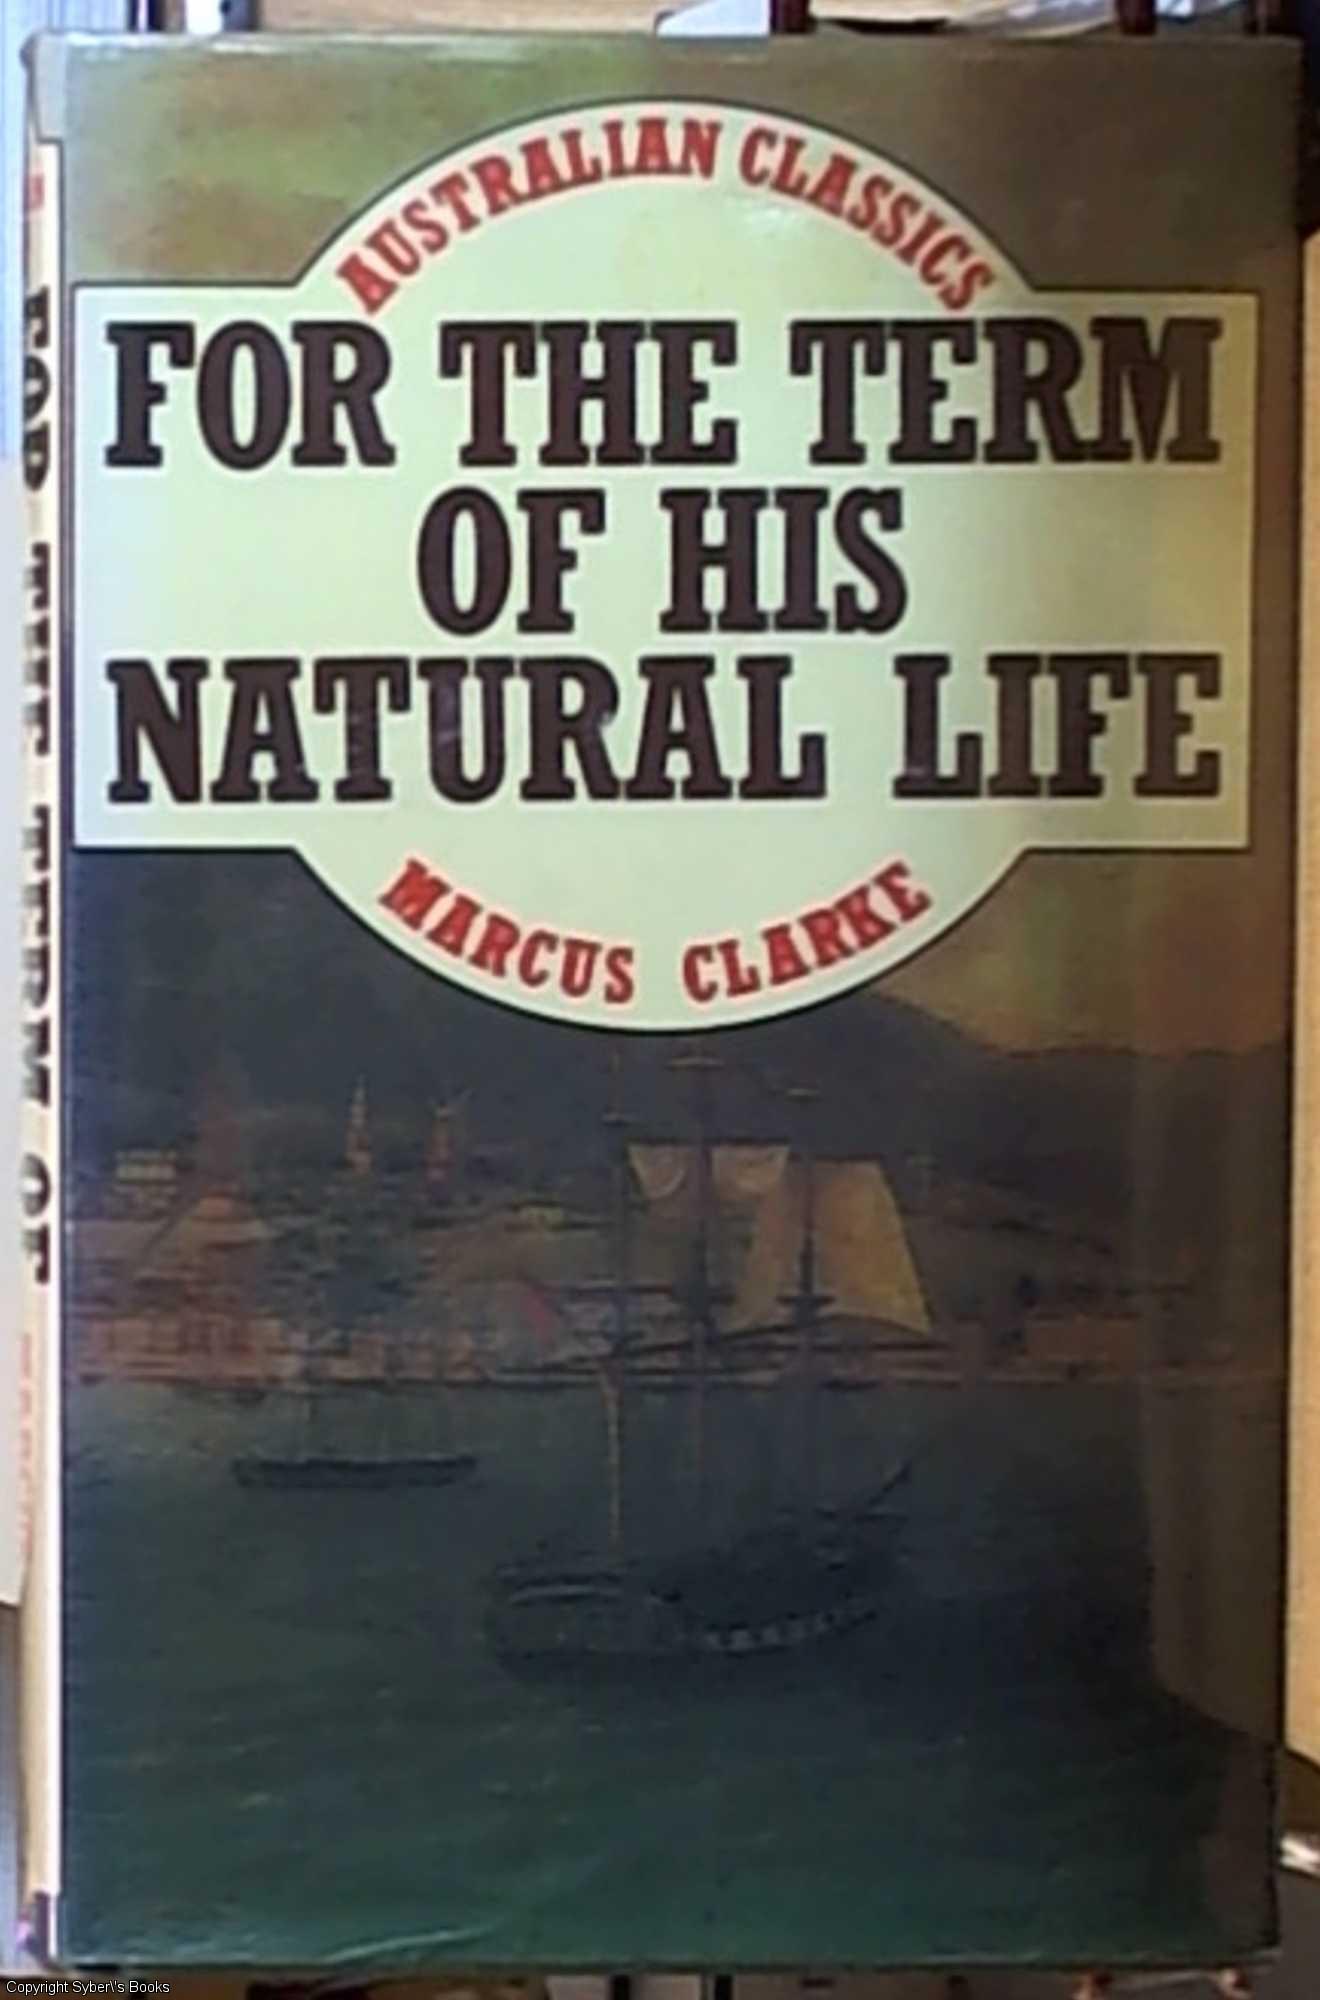 For the Term of His Natural Life - Clarke, Marcus